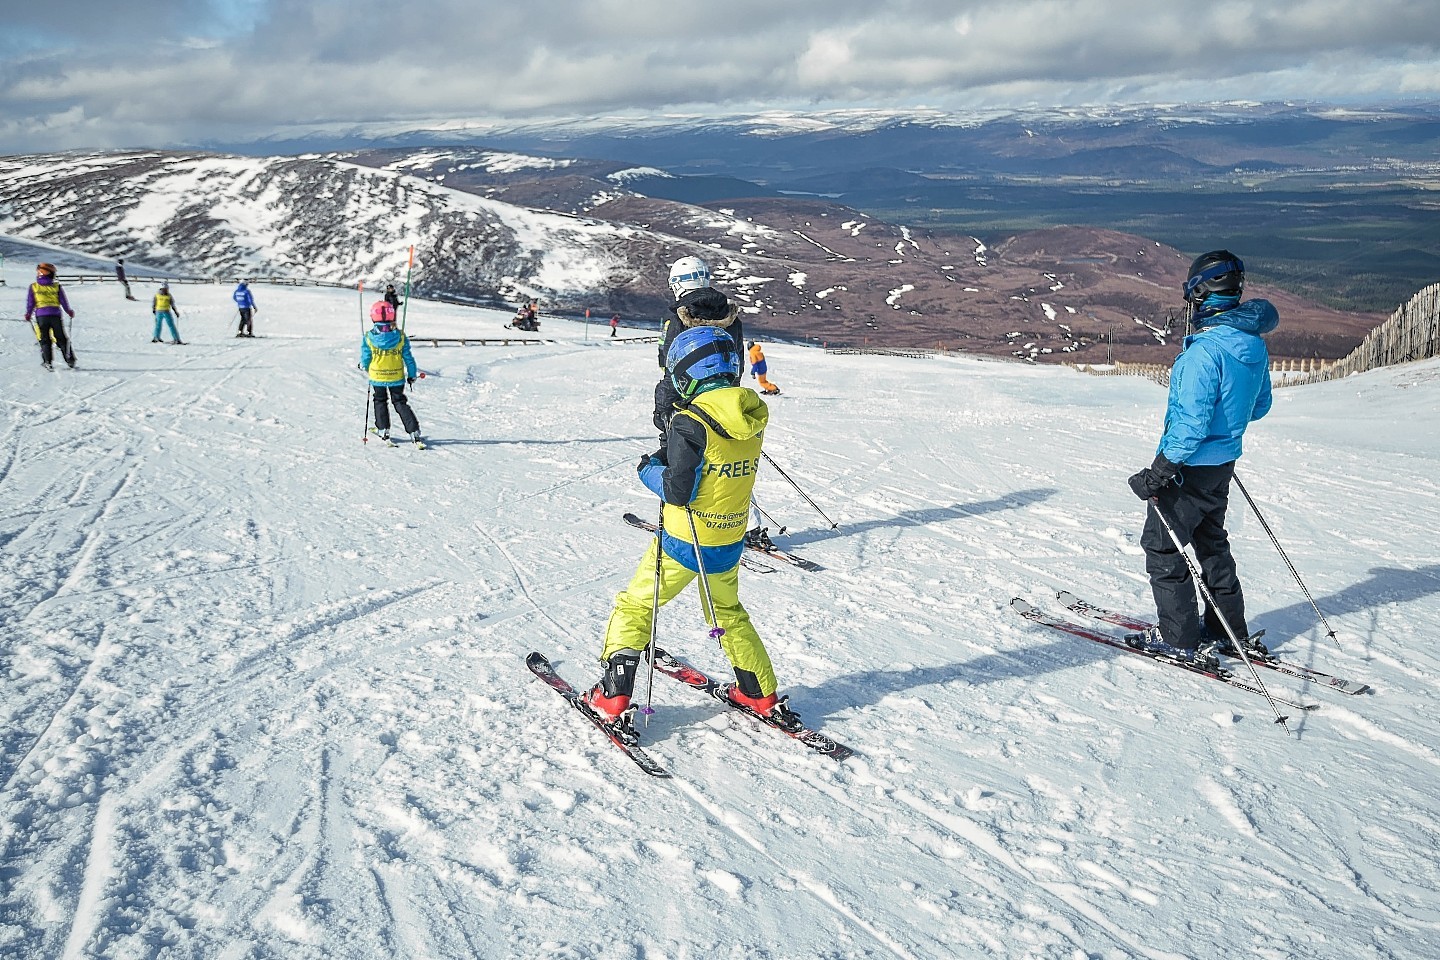 Easter skiing on the Cairngorms